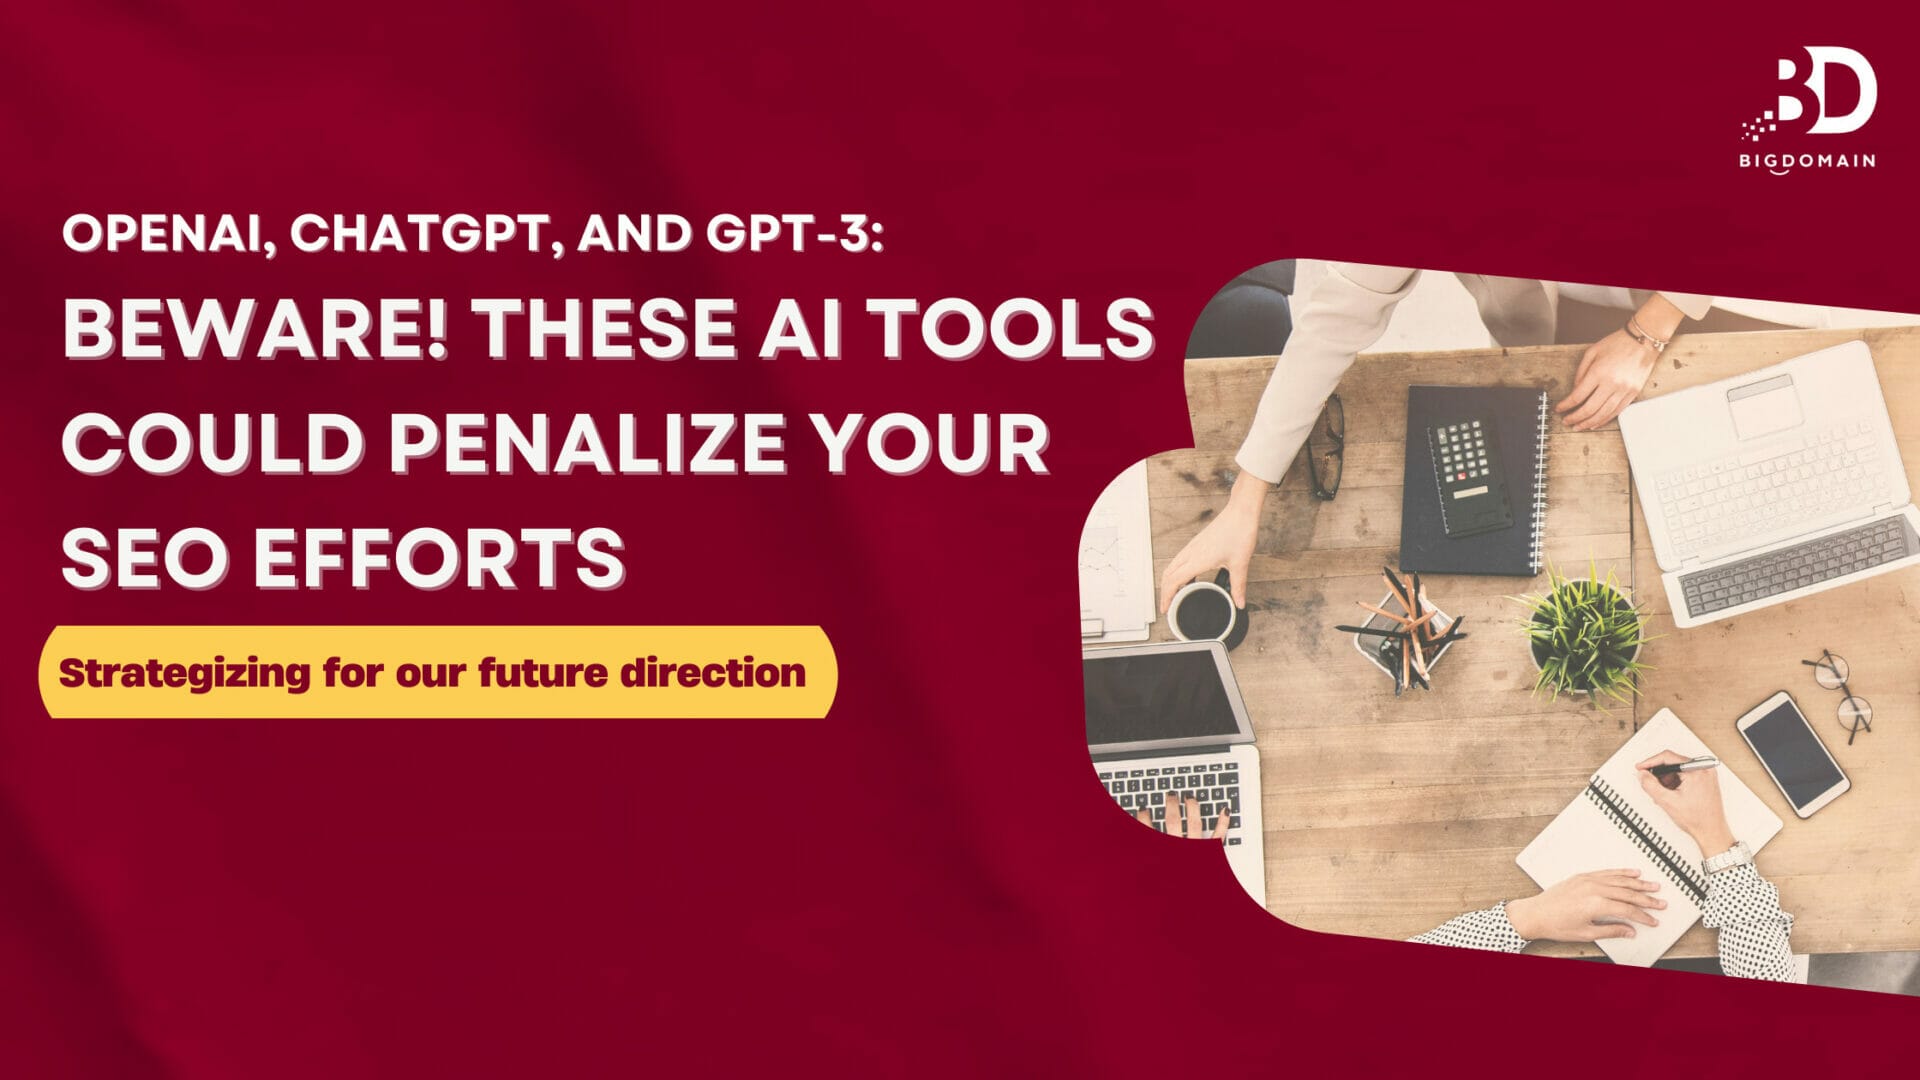 OpenAI, ChatGPT, and GPT-3: Beware! These AI Tools Could Penalize Your SEO Efforts